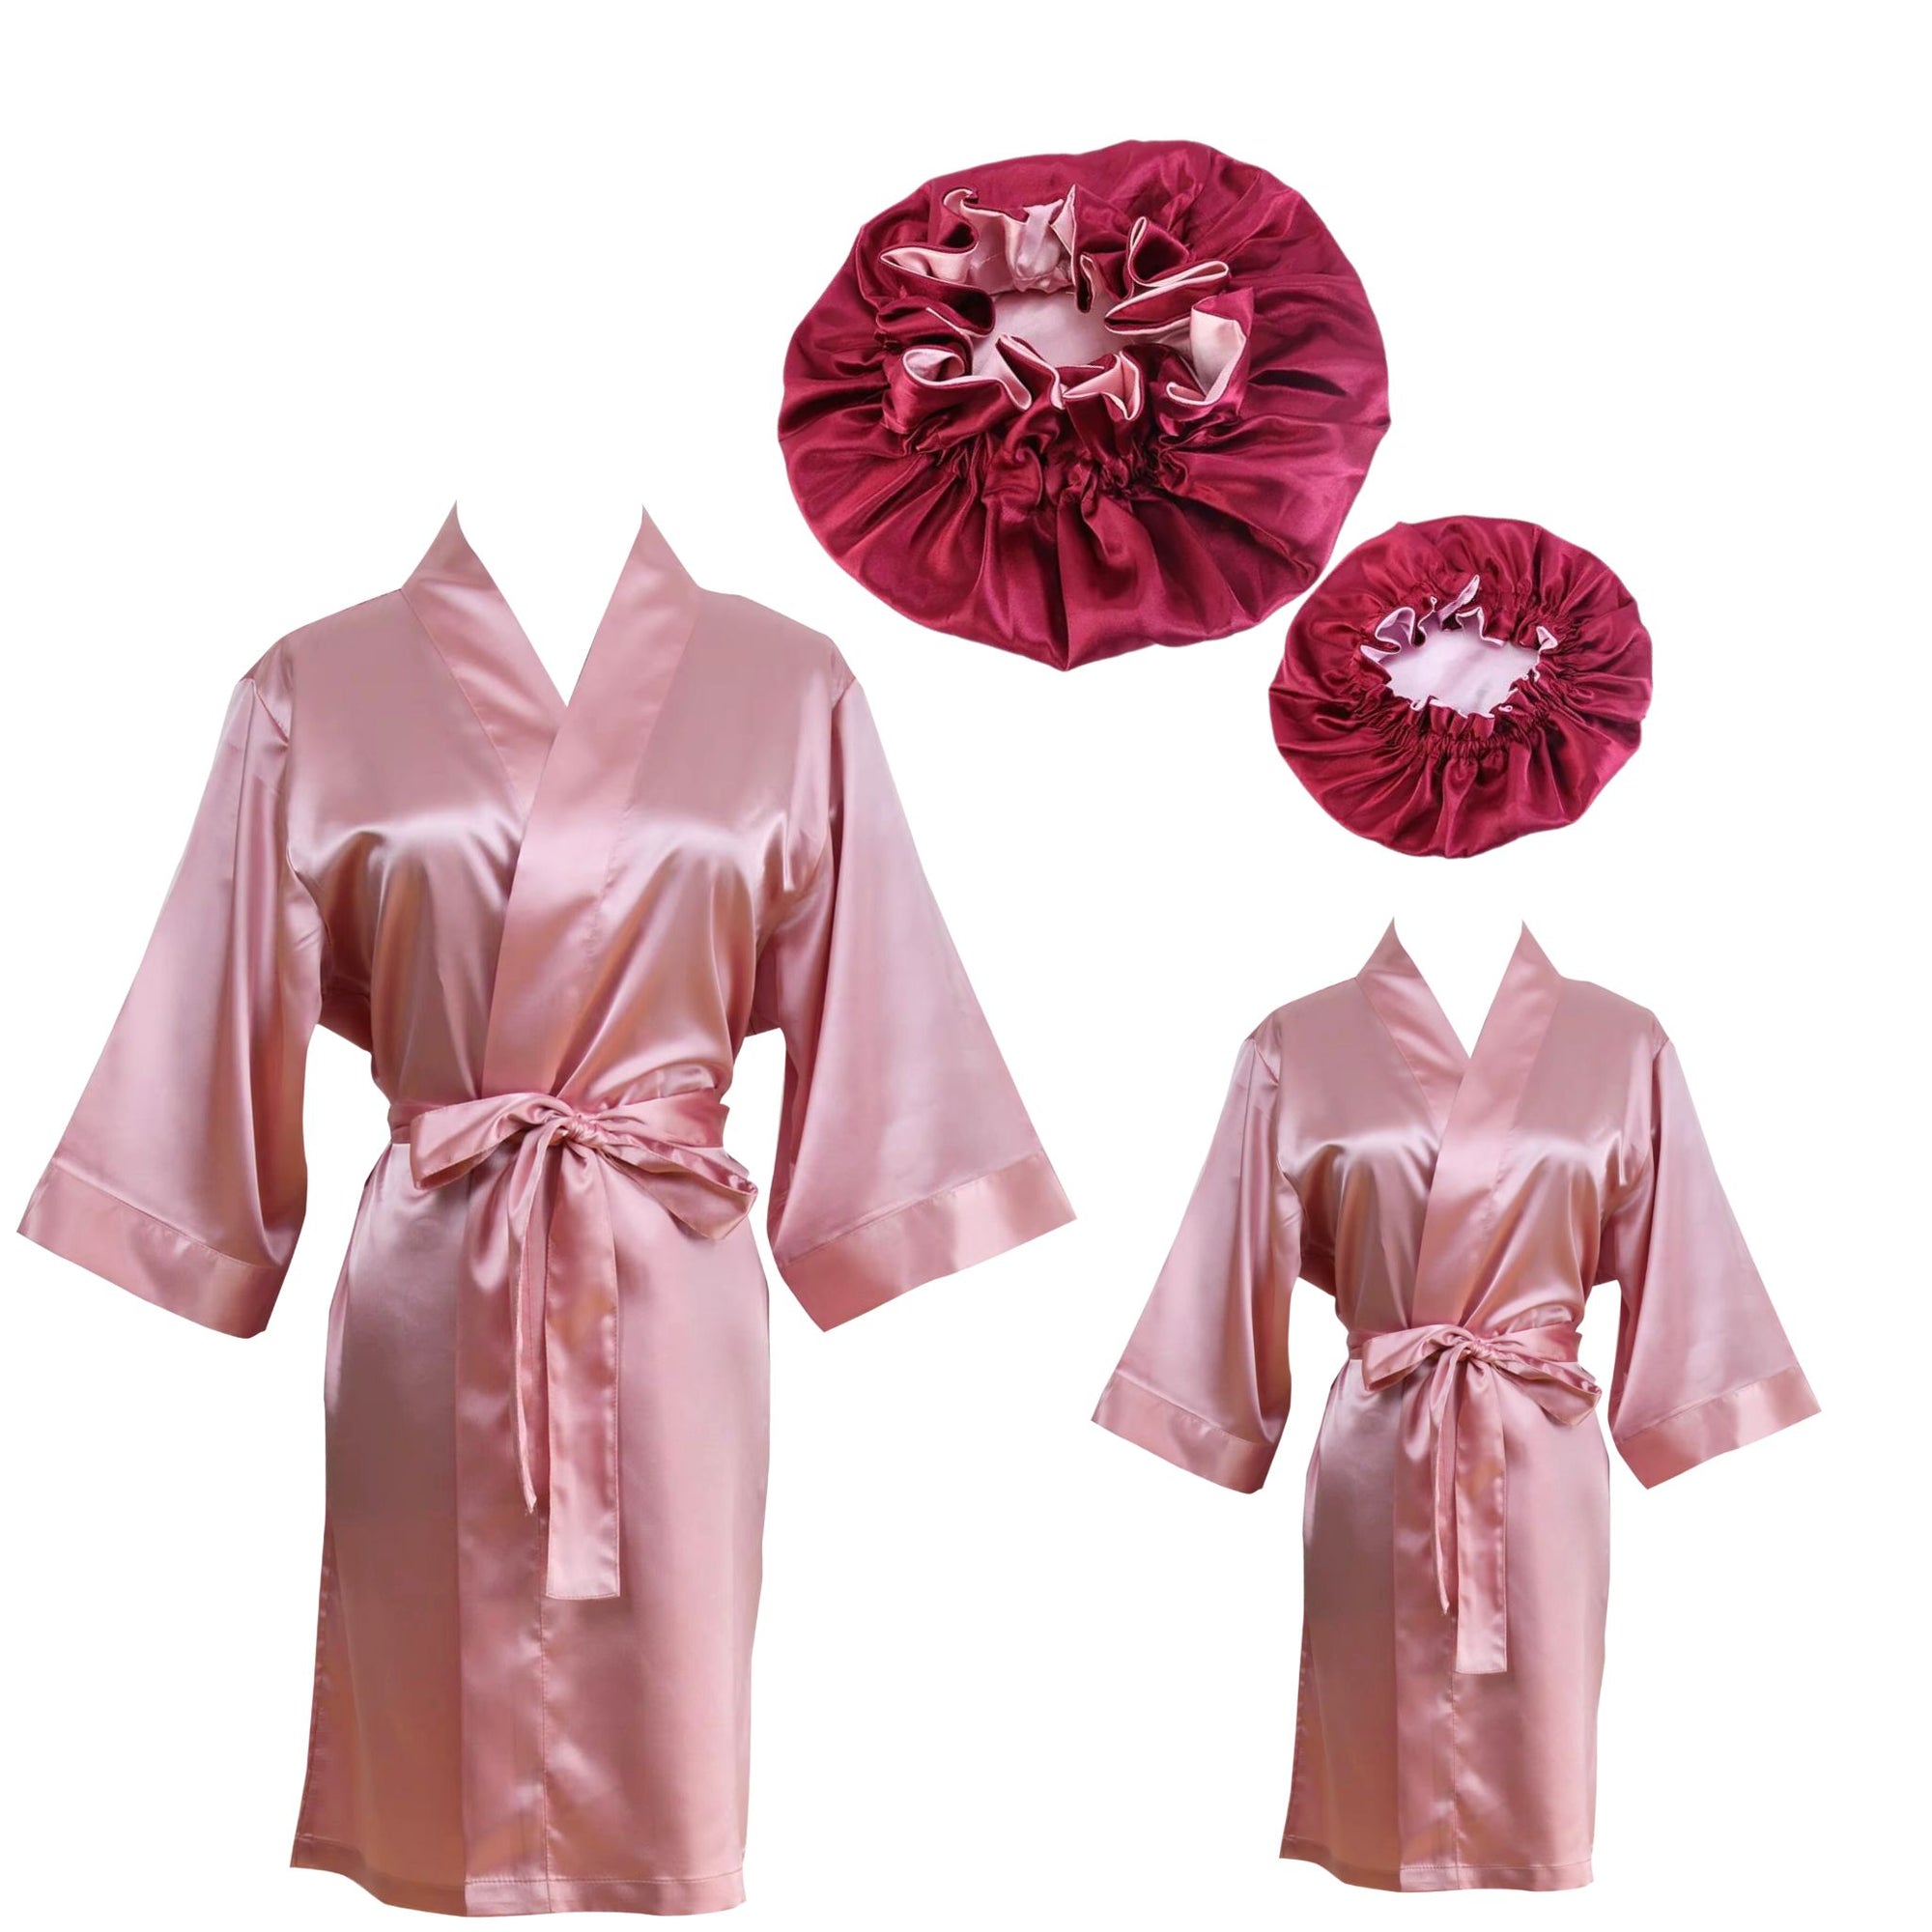 Mommy and me Pink Silky Satin Robes and matching Bonnets  | Mother daughter spa robes matching bonnets